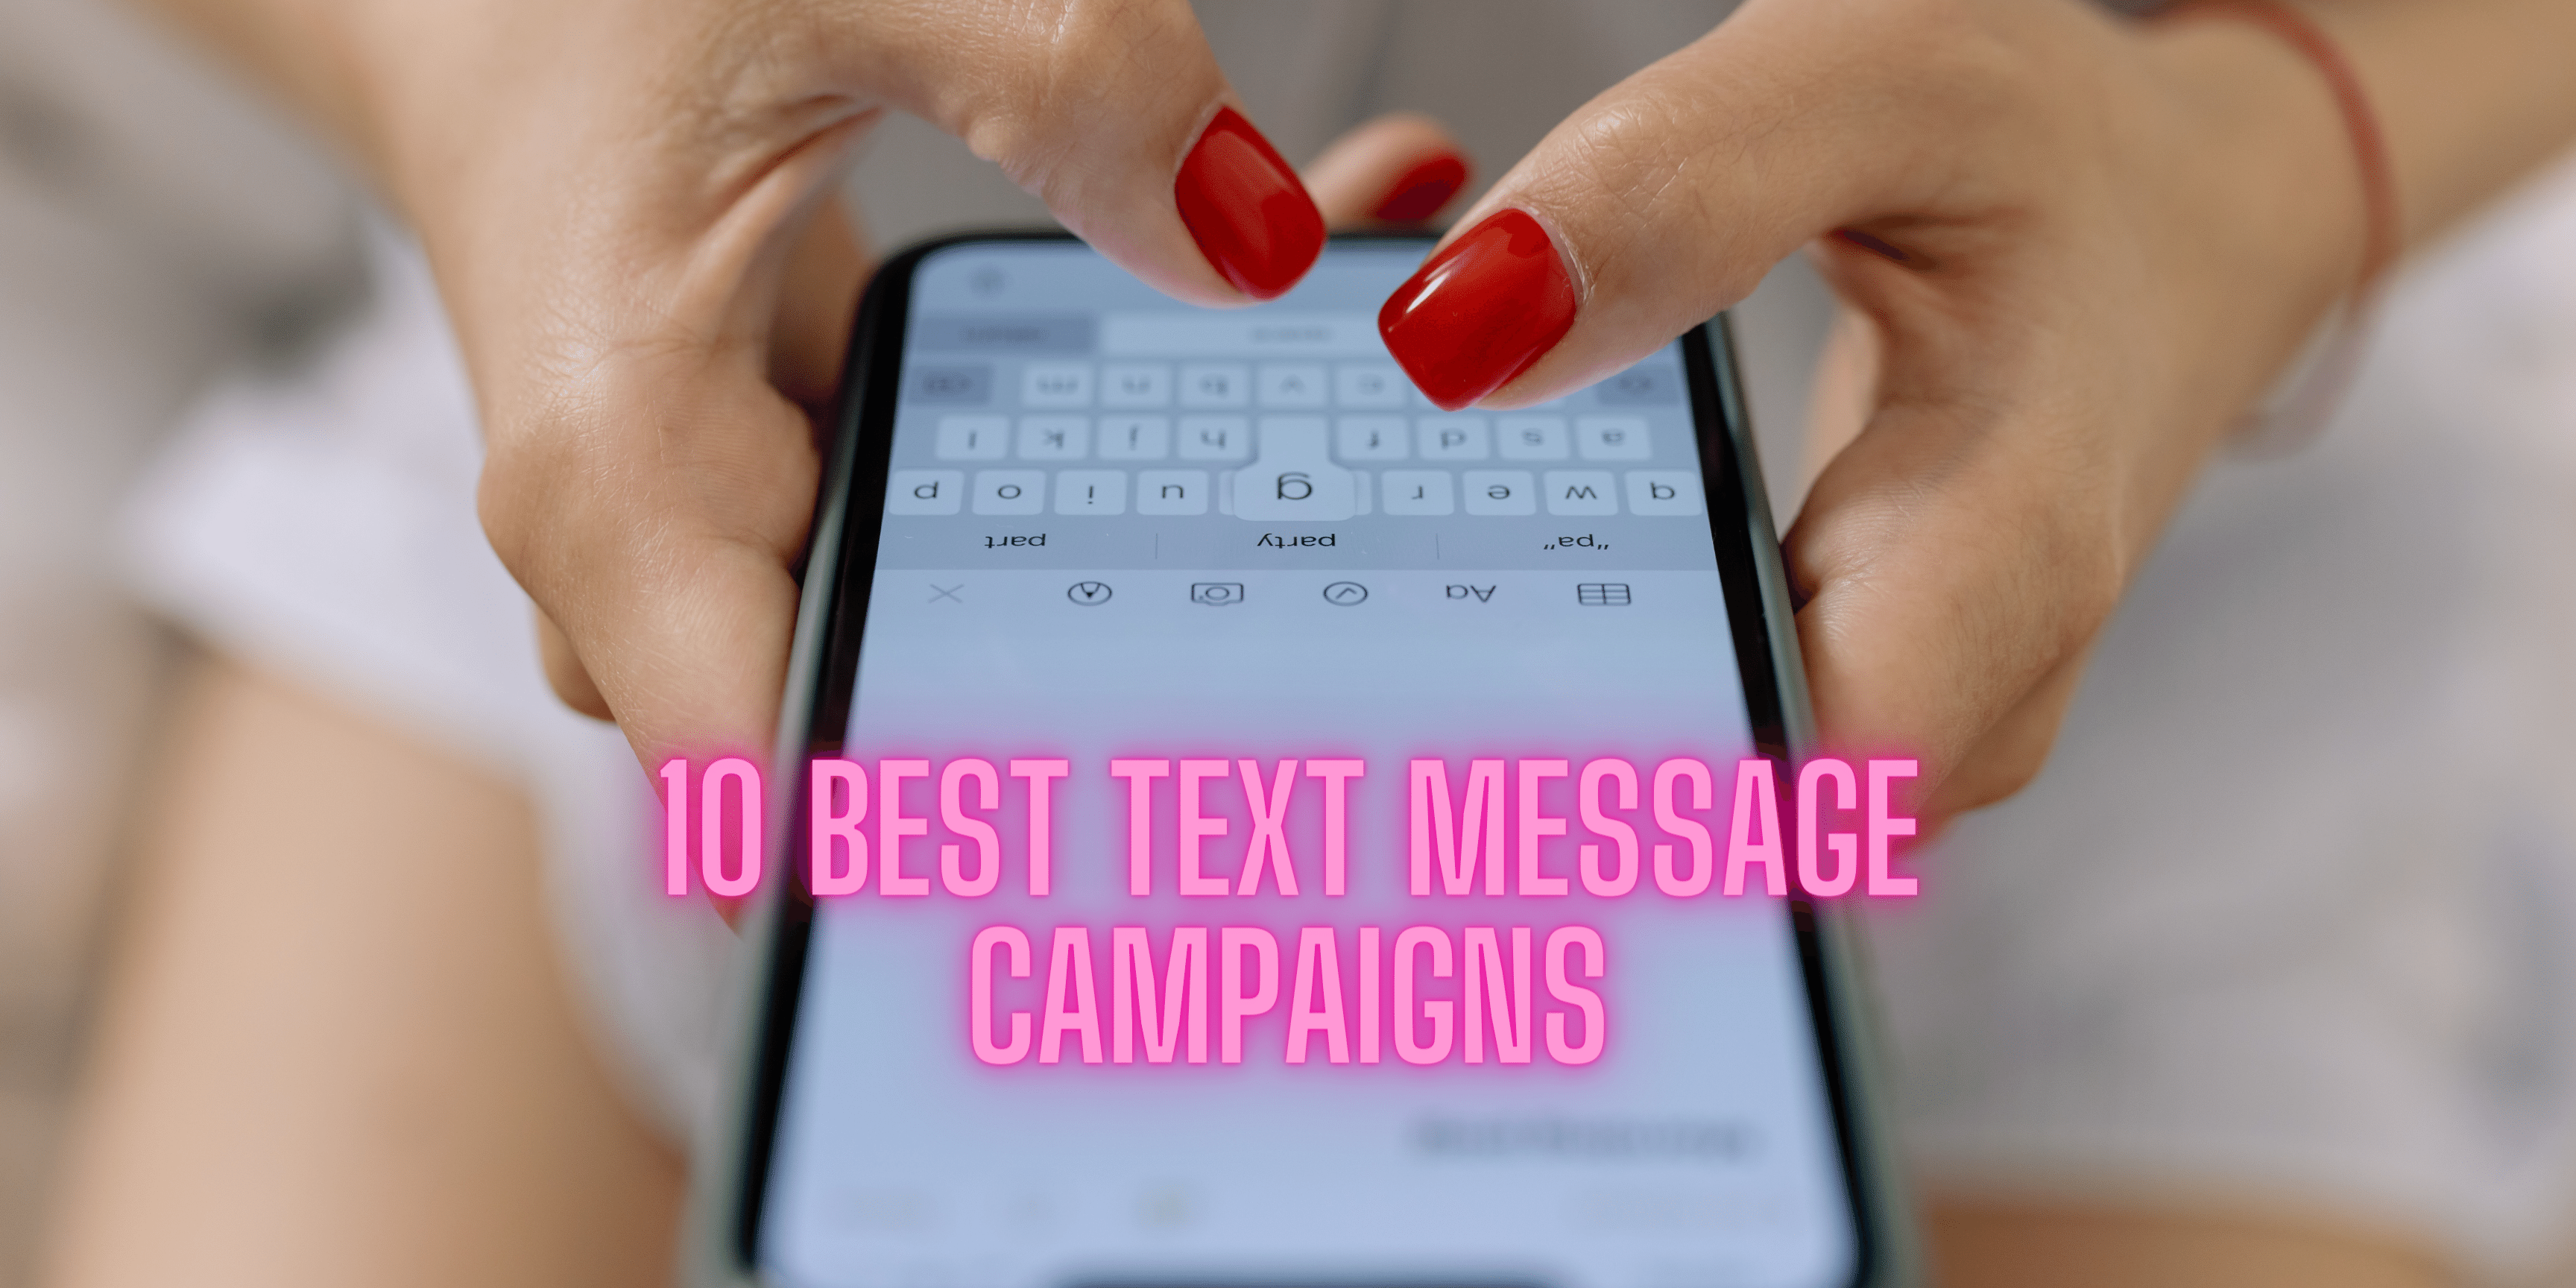 10 BEST TEXT MESSAGE MARKETING CAMPAIGNS